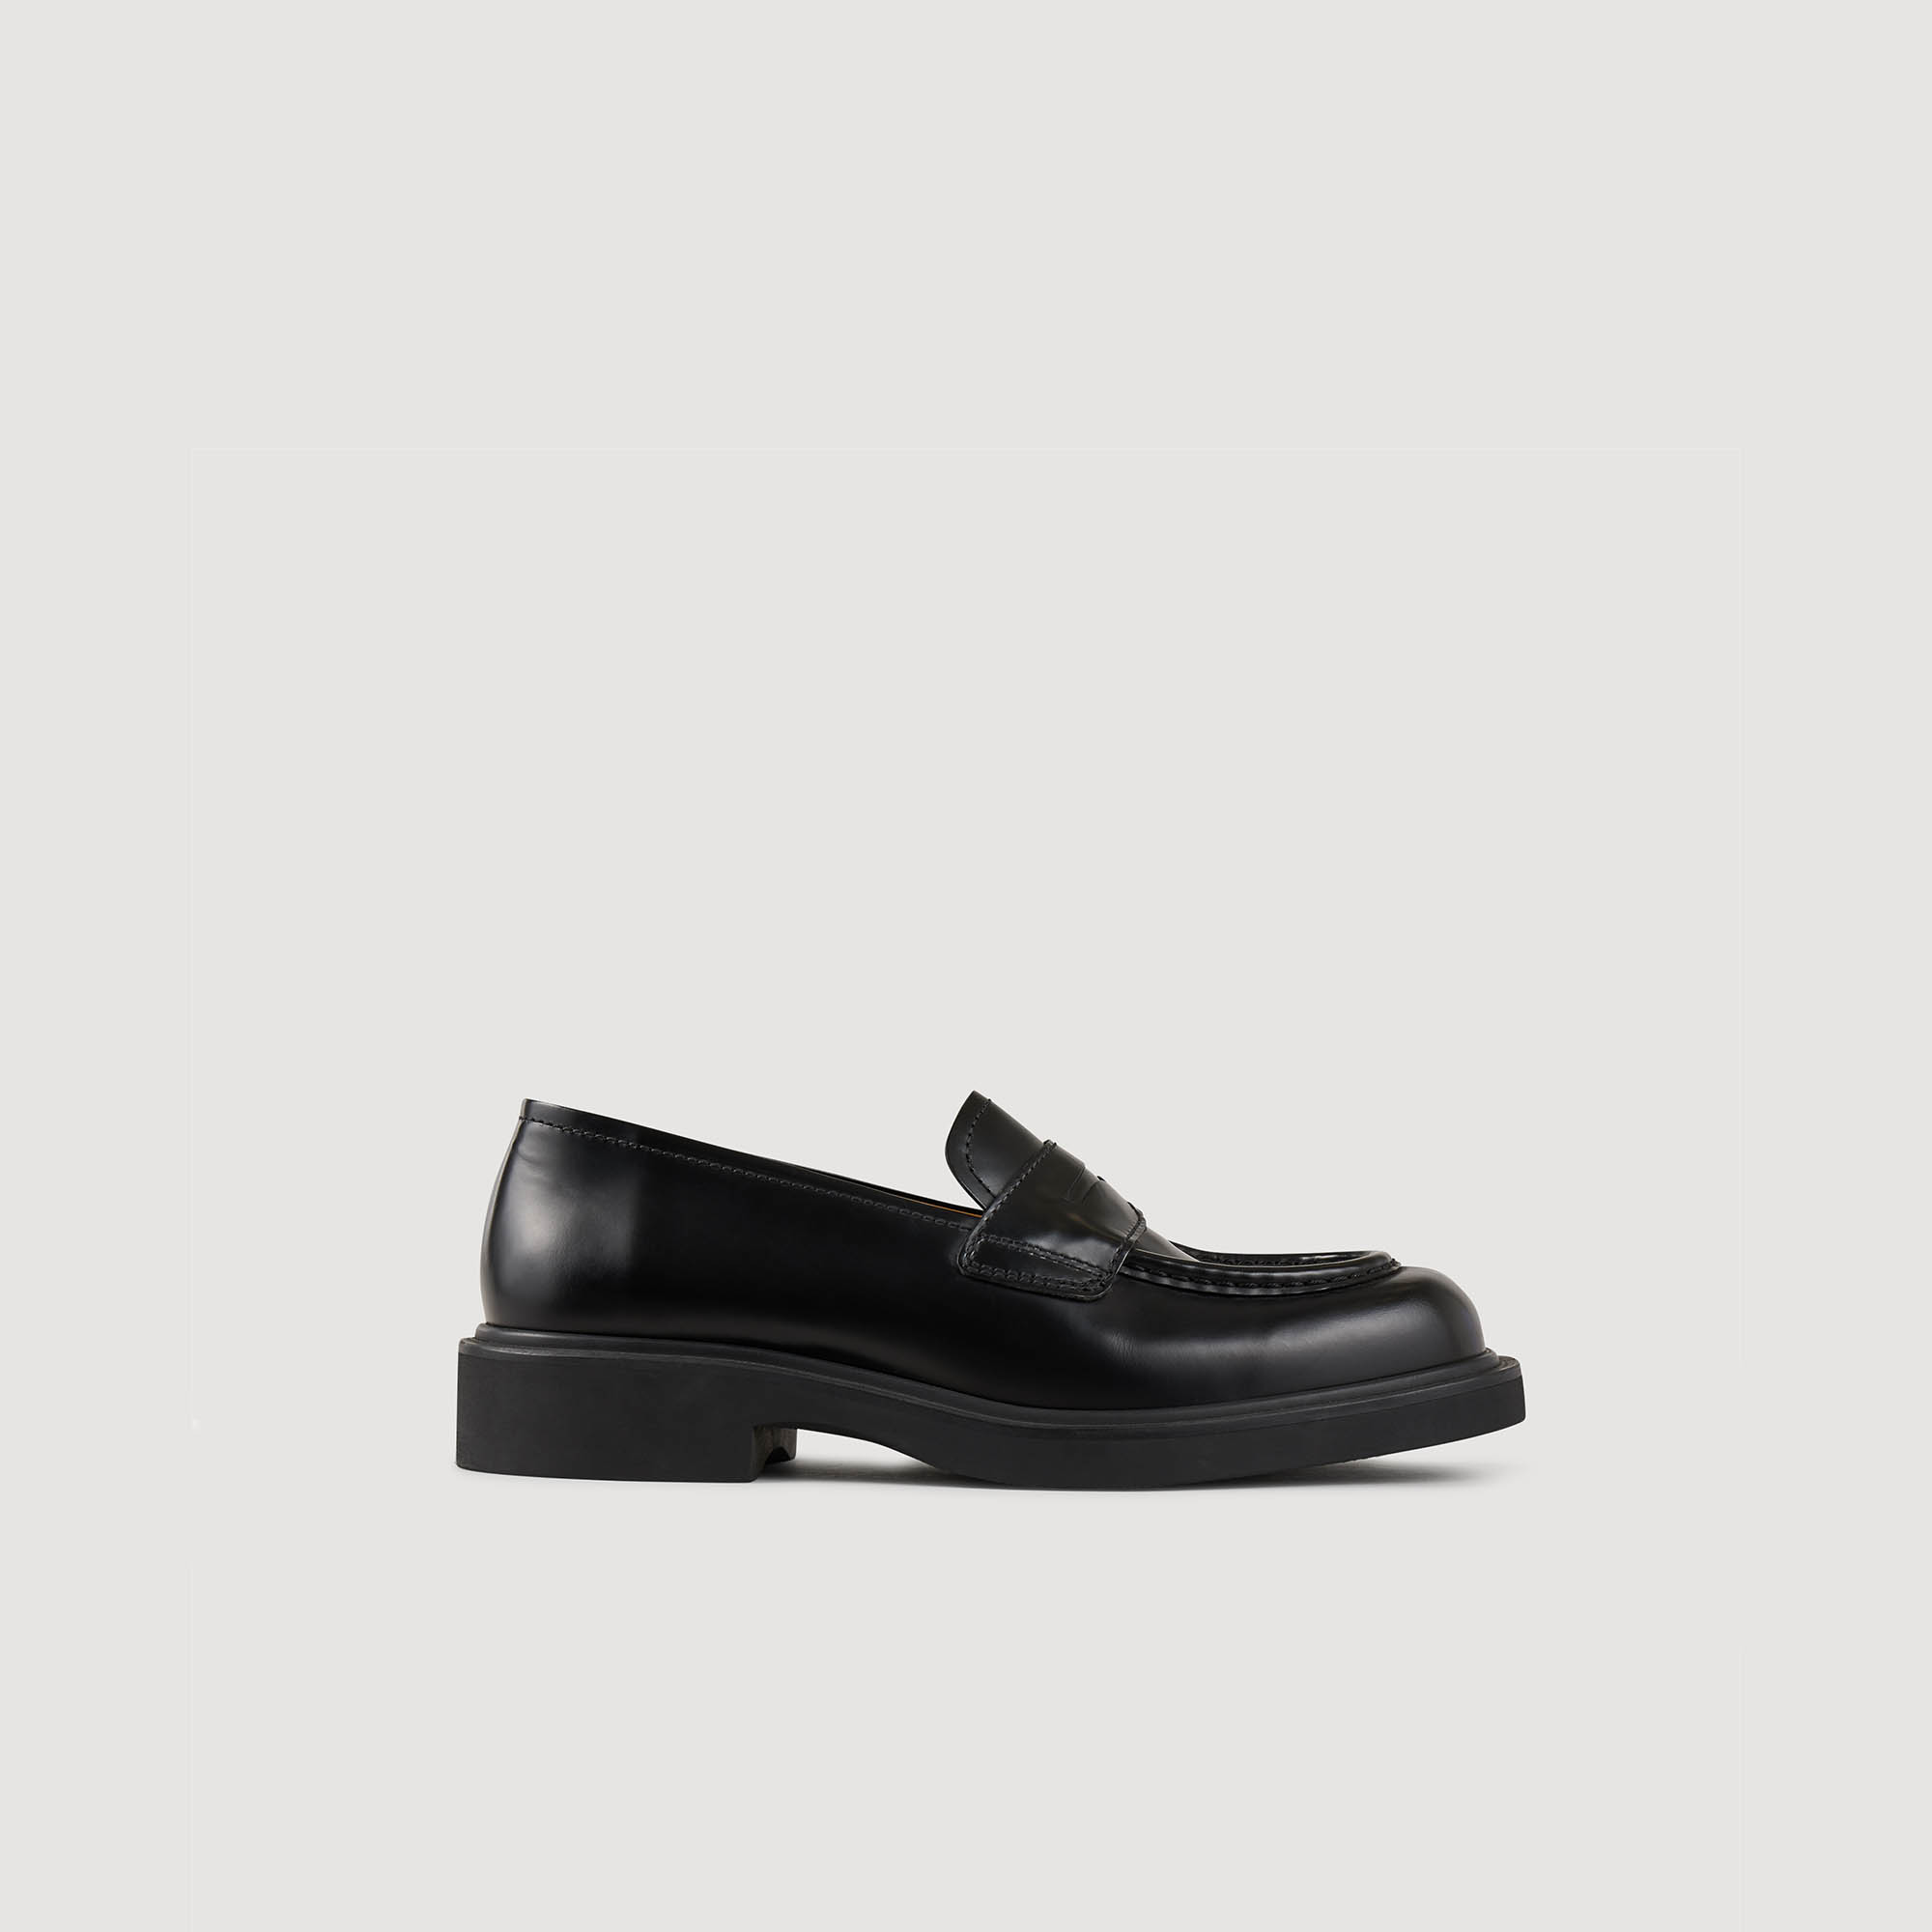 Sandro Patent Leather Loafers